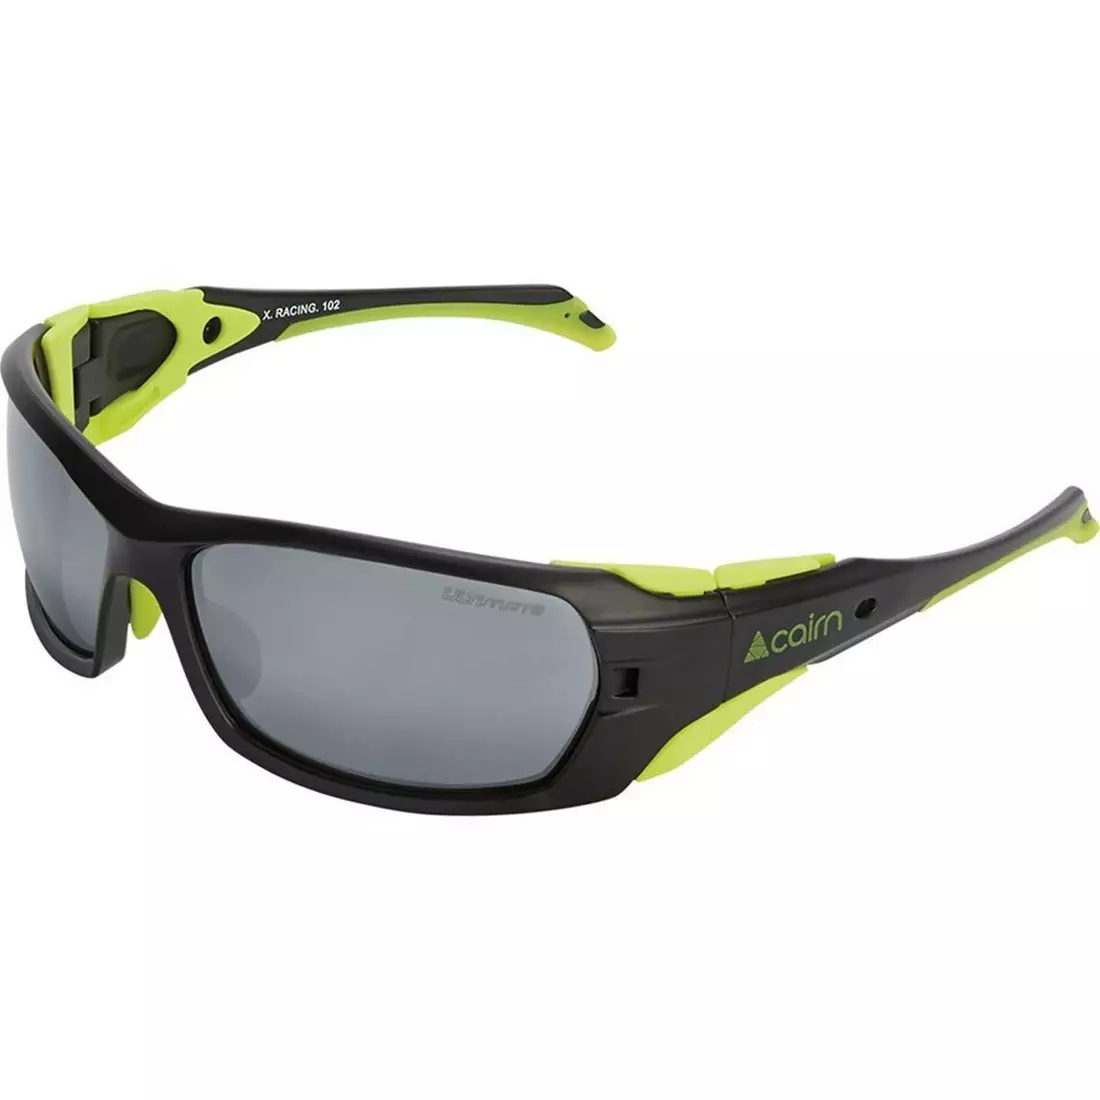 CAIRN sports glasses RACING fluo black XRACING102